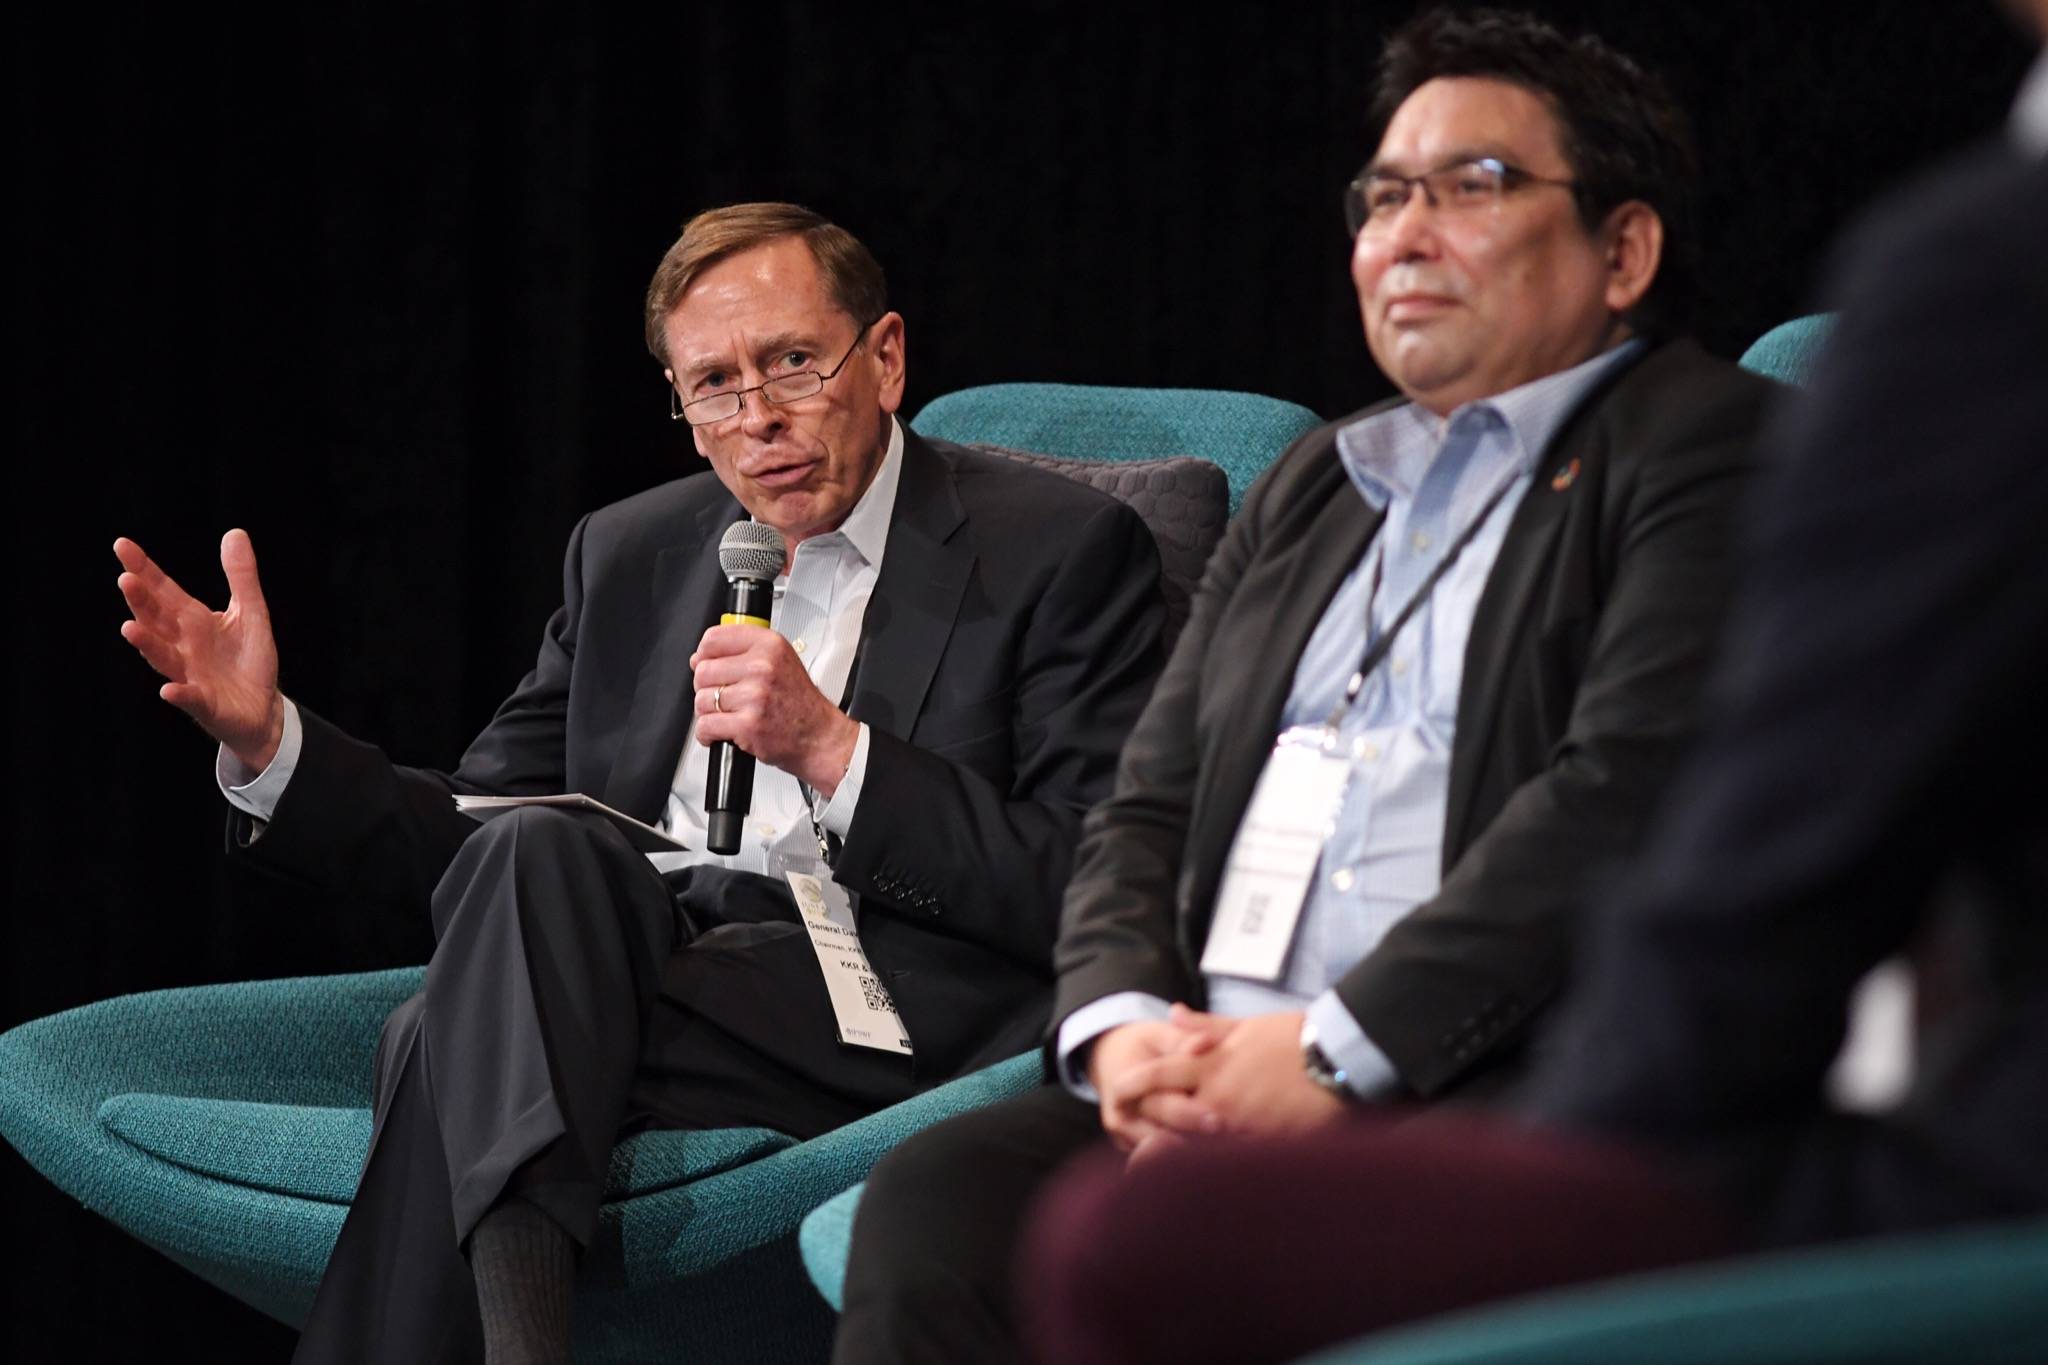 David Petraeus, Chairman of the KKR Global Institute, left, speaks during a panel discussion, including Vittus Qujaukitsoq, Minister for Finance and Nordic Cooperation for the government of Greenland, right, at the annual meeting of the International Forum of Sovereign Wealth Funds at Centennial Hall on Thursday, Sept. 12, 2019. (Michael Penn | Juneau Empire)